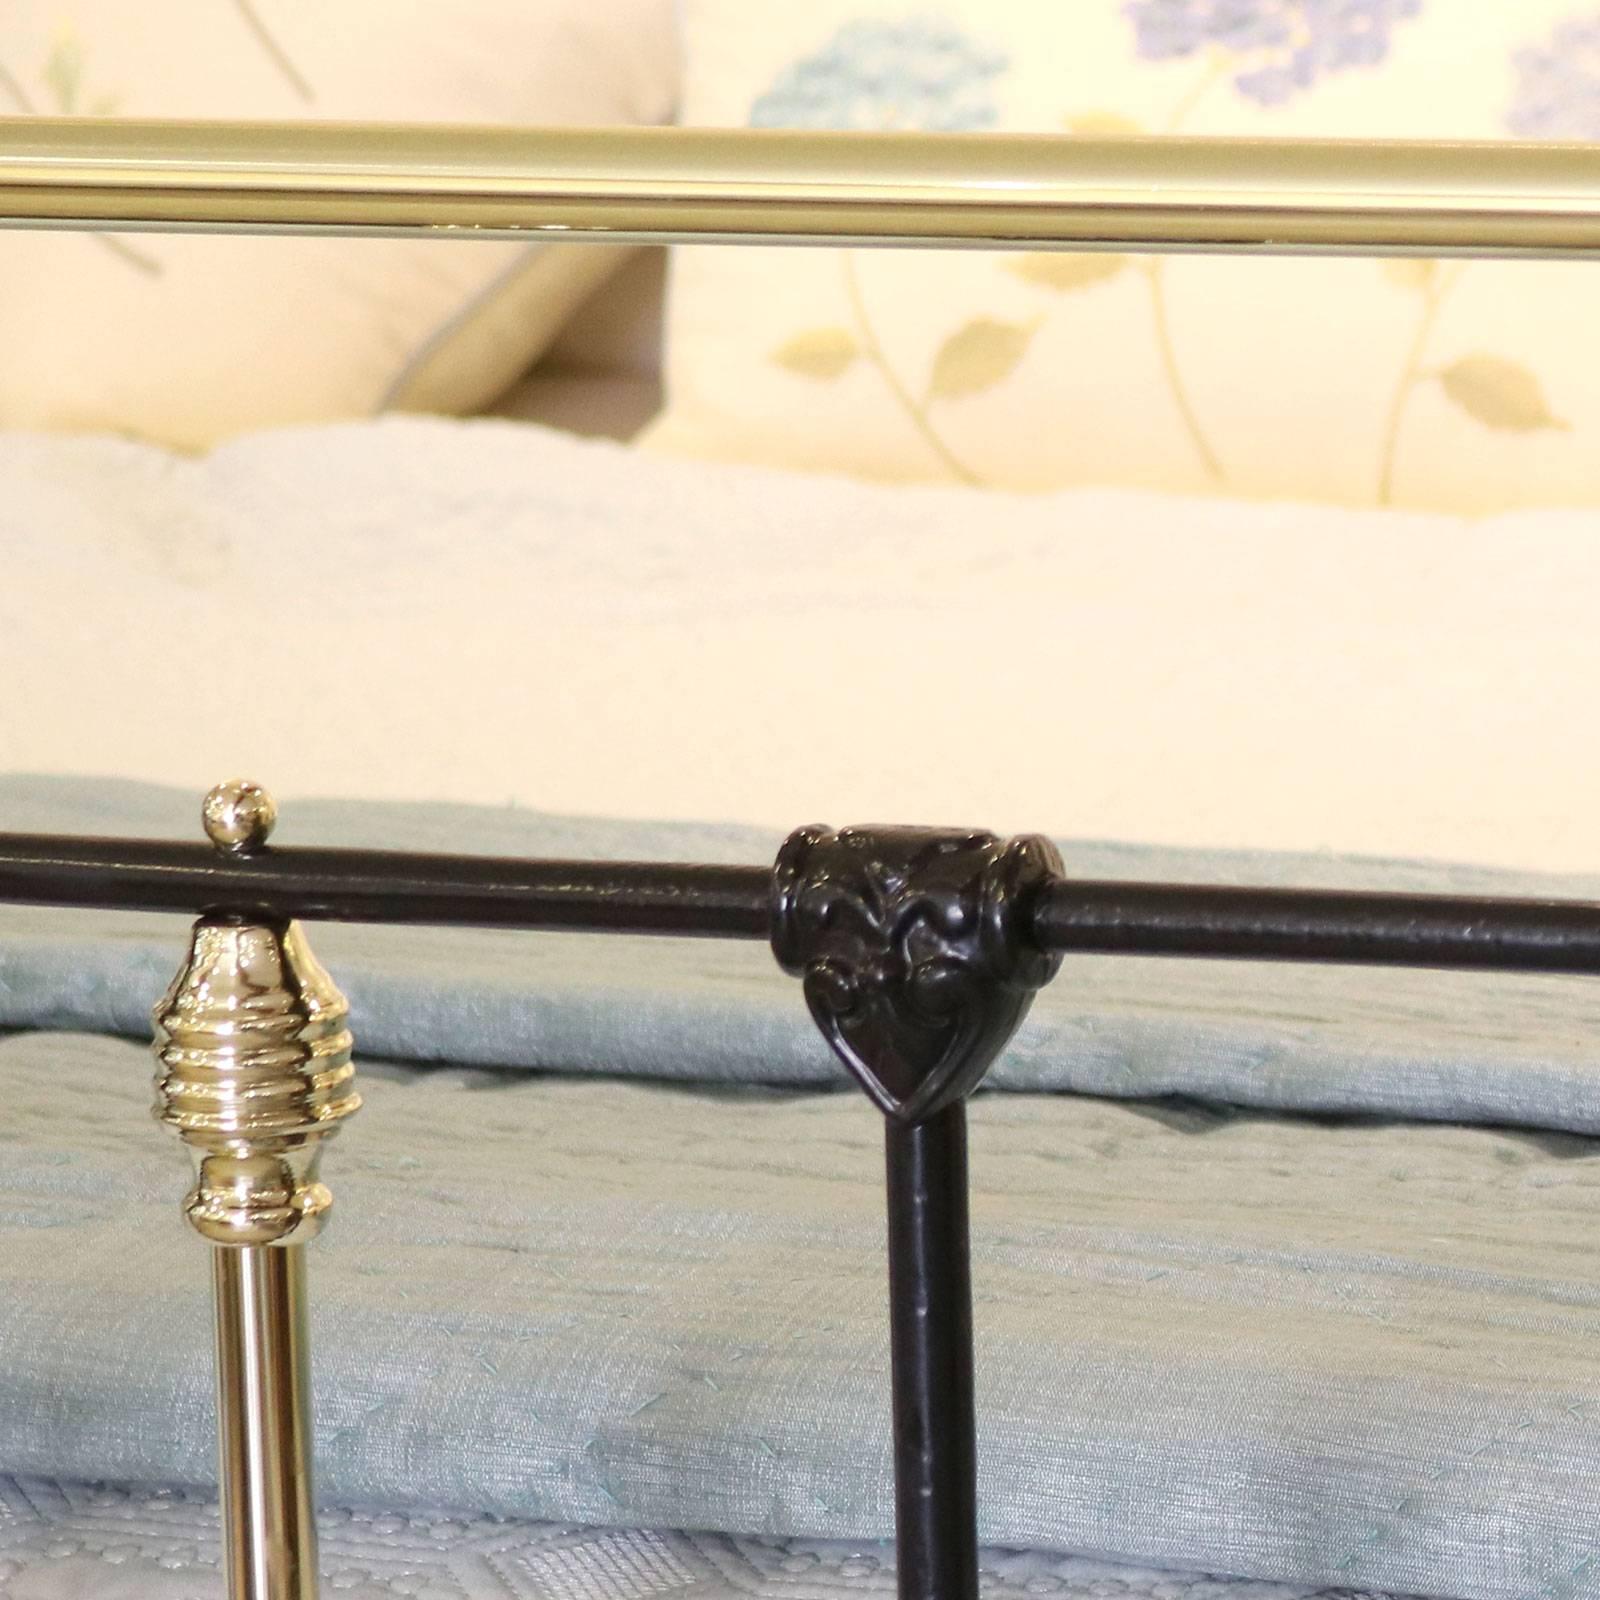 English Brass and Iron Bed in Black, MK113